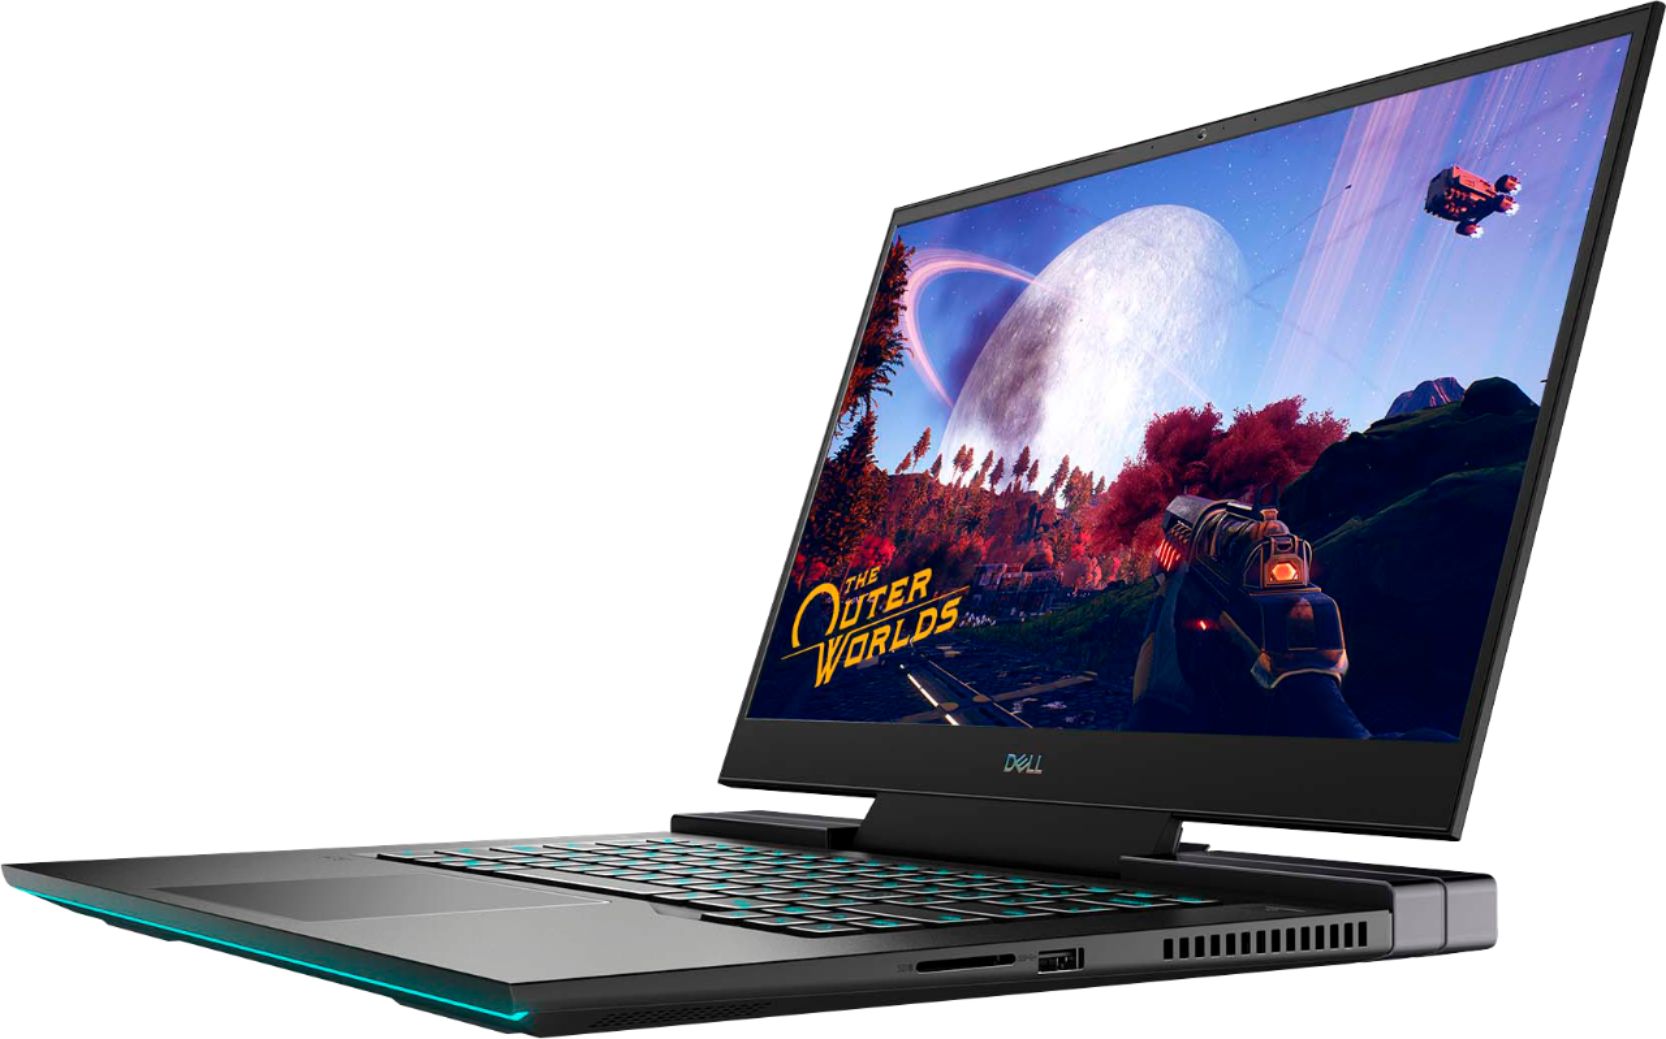 Get a 4K OLED Dell G7 gaming laptop with Core i7, 16 GB RAM, and GeForce  RTX 2070 Max-Q graphics for only $1300 USD  News